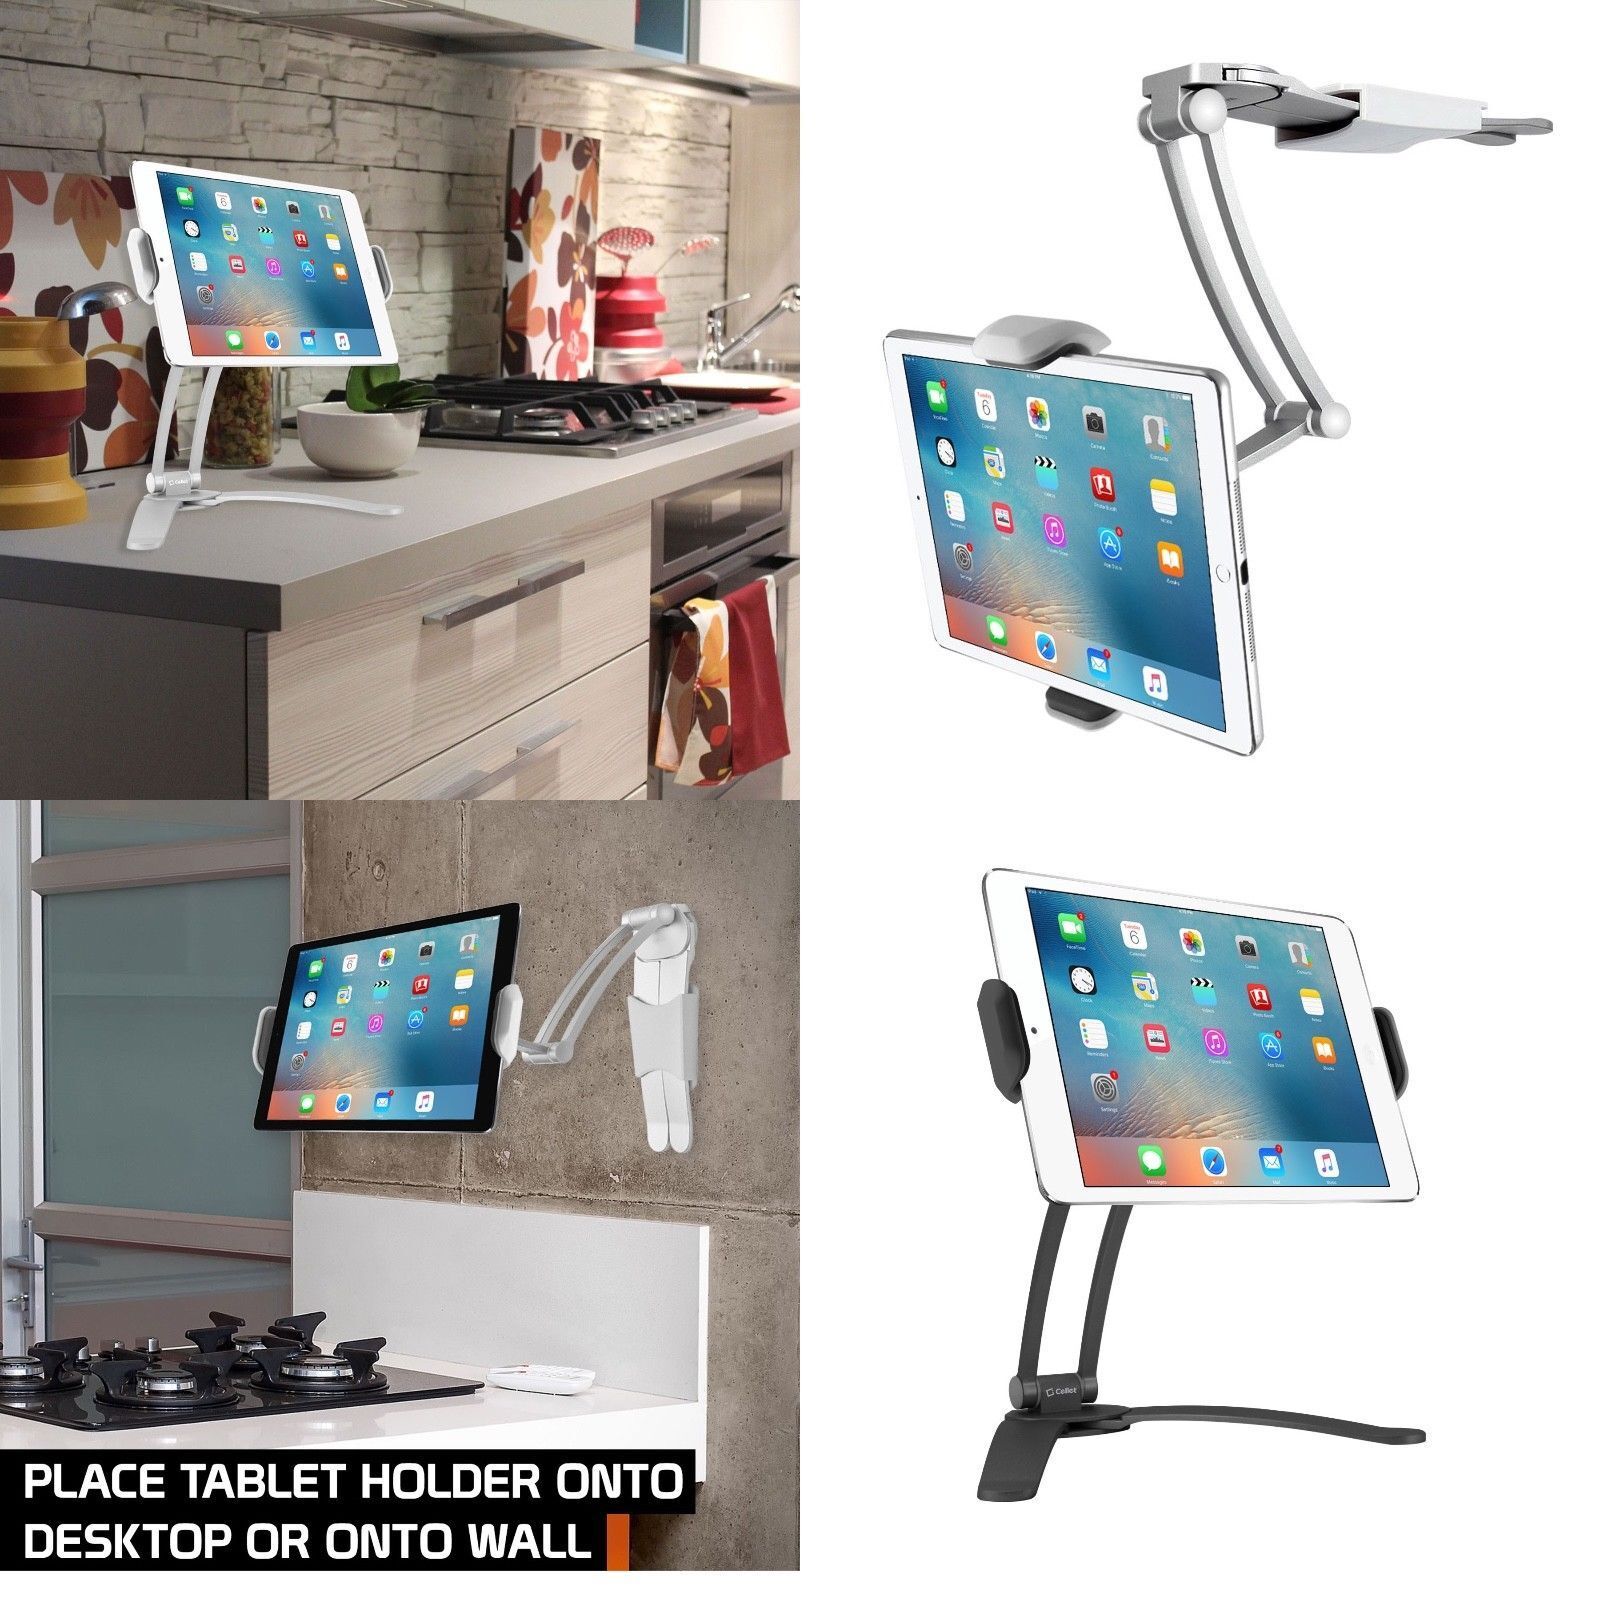 2in1 Desktop Kitchen Wall Mount Stand + Bracket Holder for Phone Tablet iPad Air